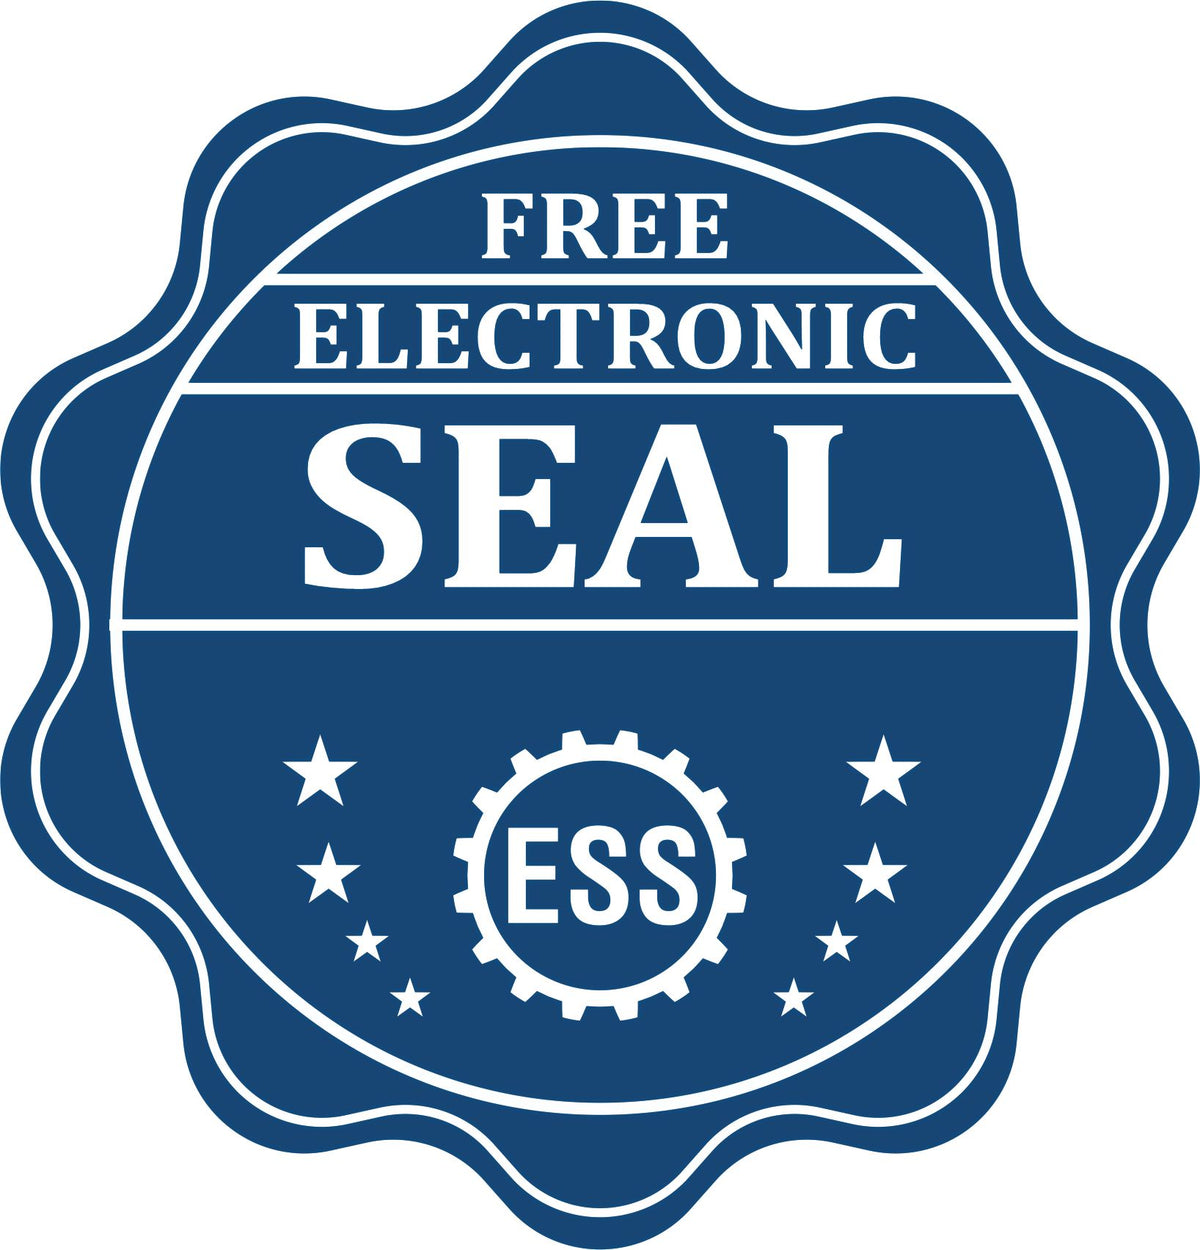 A badge showing a free electronic seal for the New Mexico Professional Engineer Seal Stamp with stars and the ESS gear on the emblem.